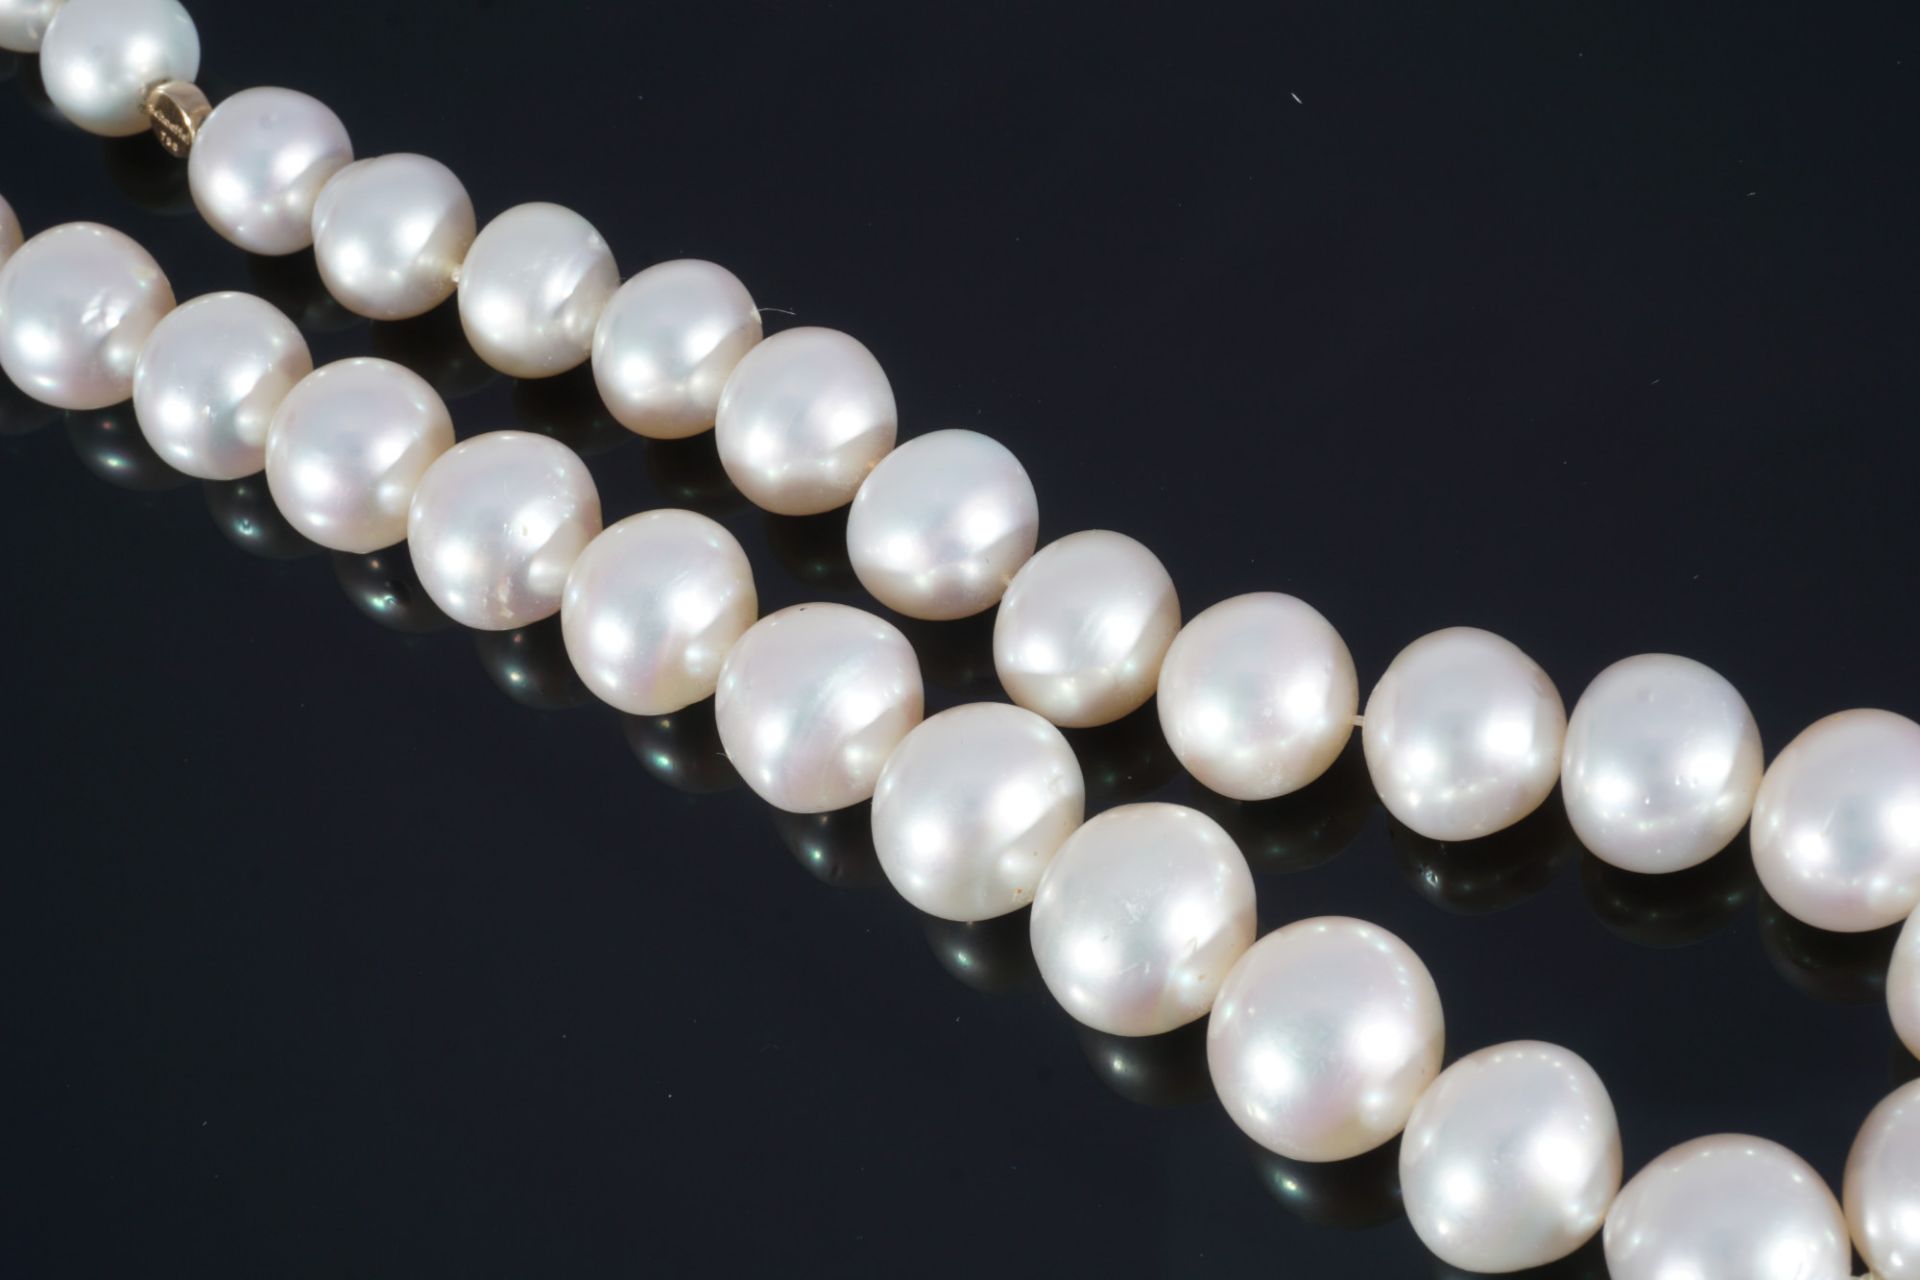 Schoeffel großes Perlencollier mit 750 Gold Nuggets, pearl necklace with 18k gold nuggets, - Image 5 of 5